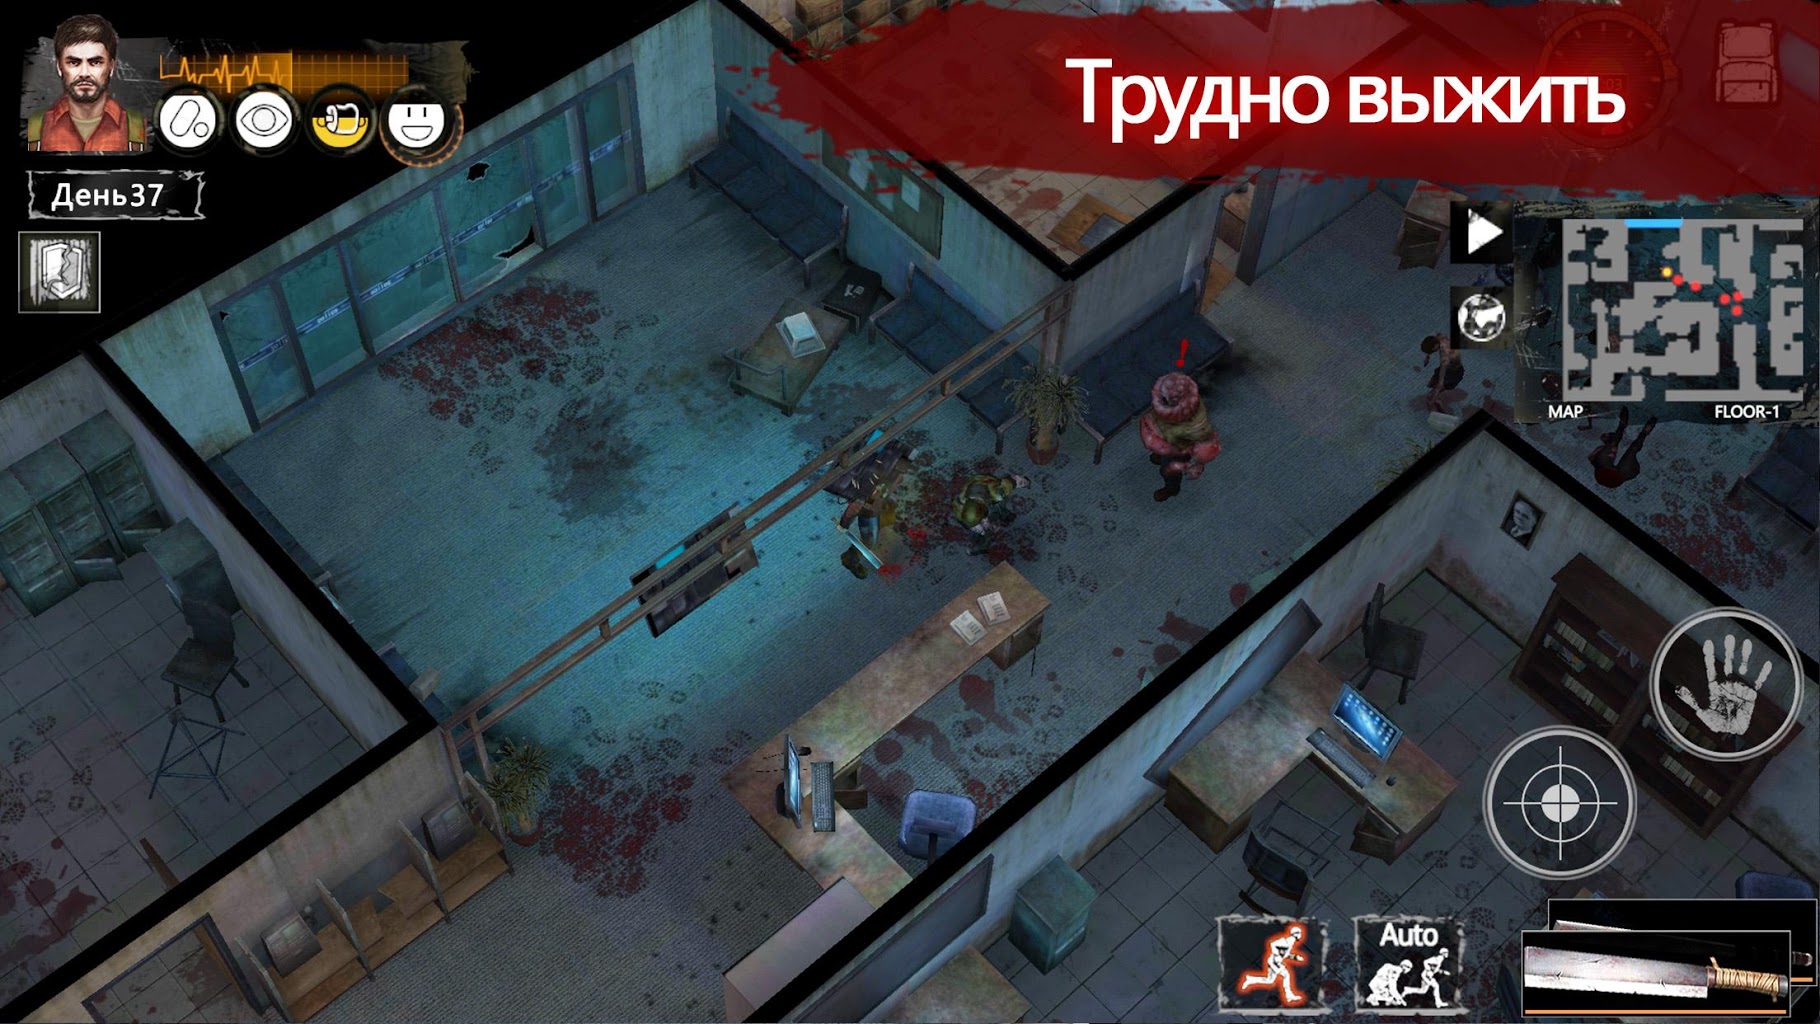 Delivery from the pain андроид. Delivery from the Pain мод. Игра delivery from the Pain. Delivery from the Pain Android game.